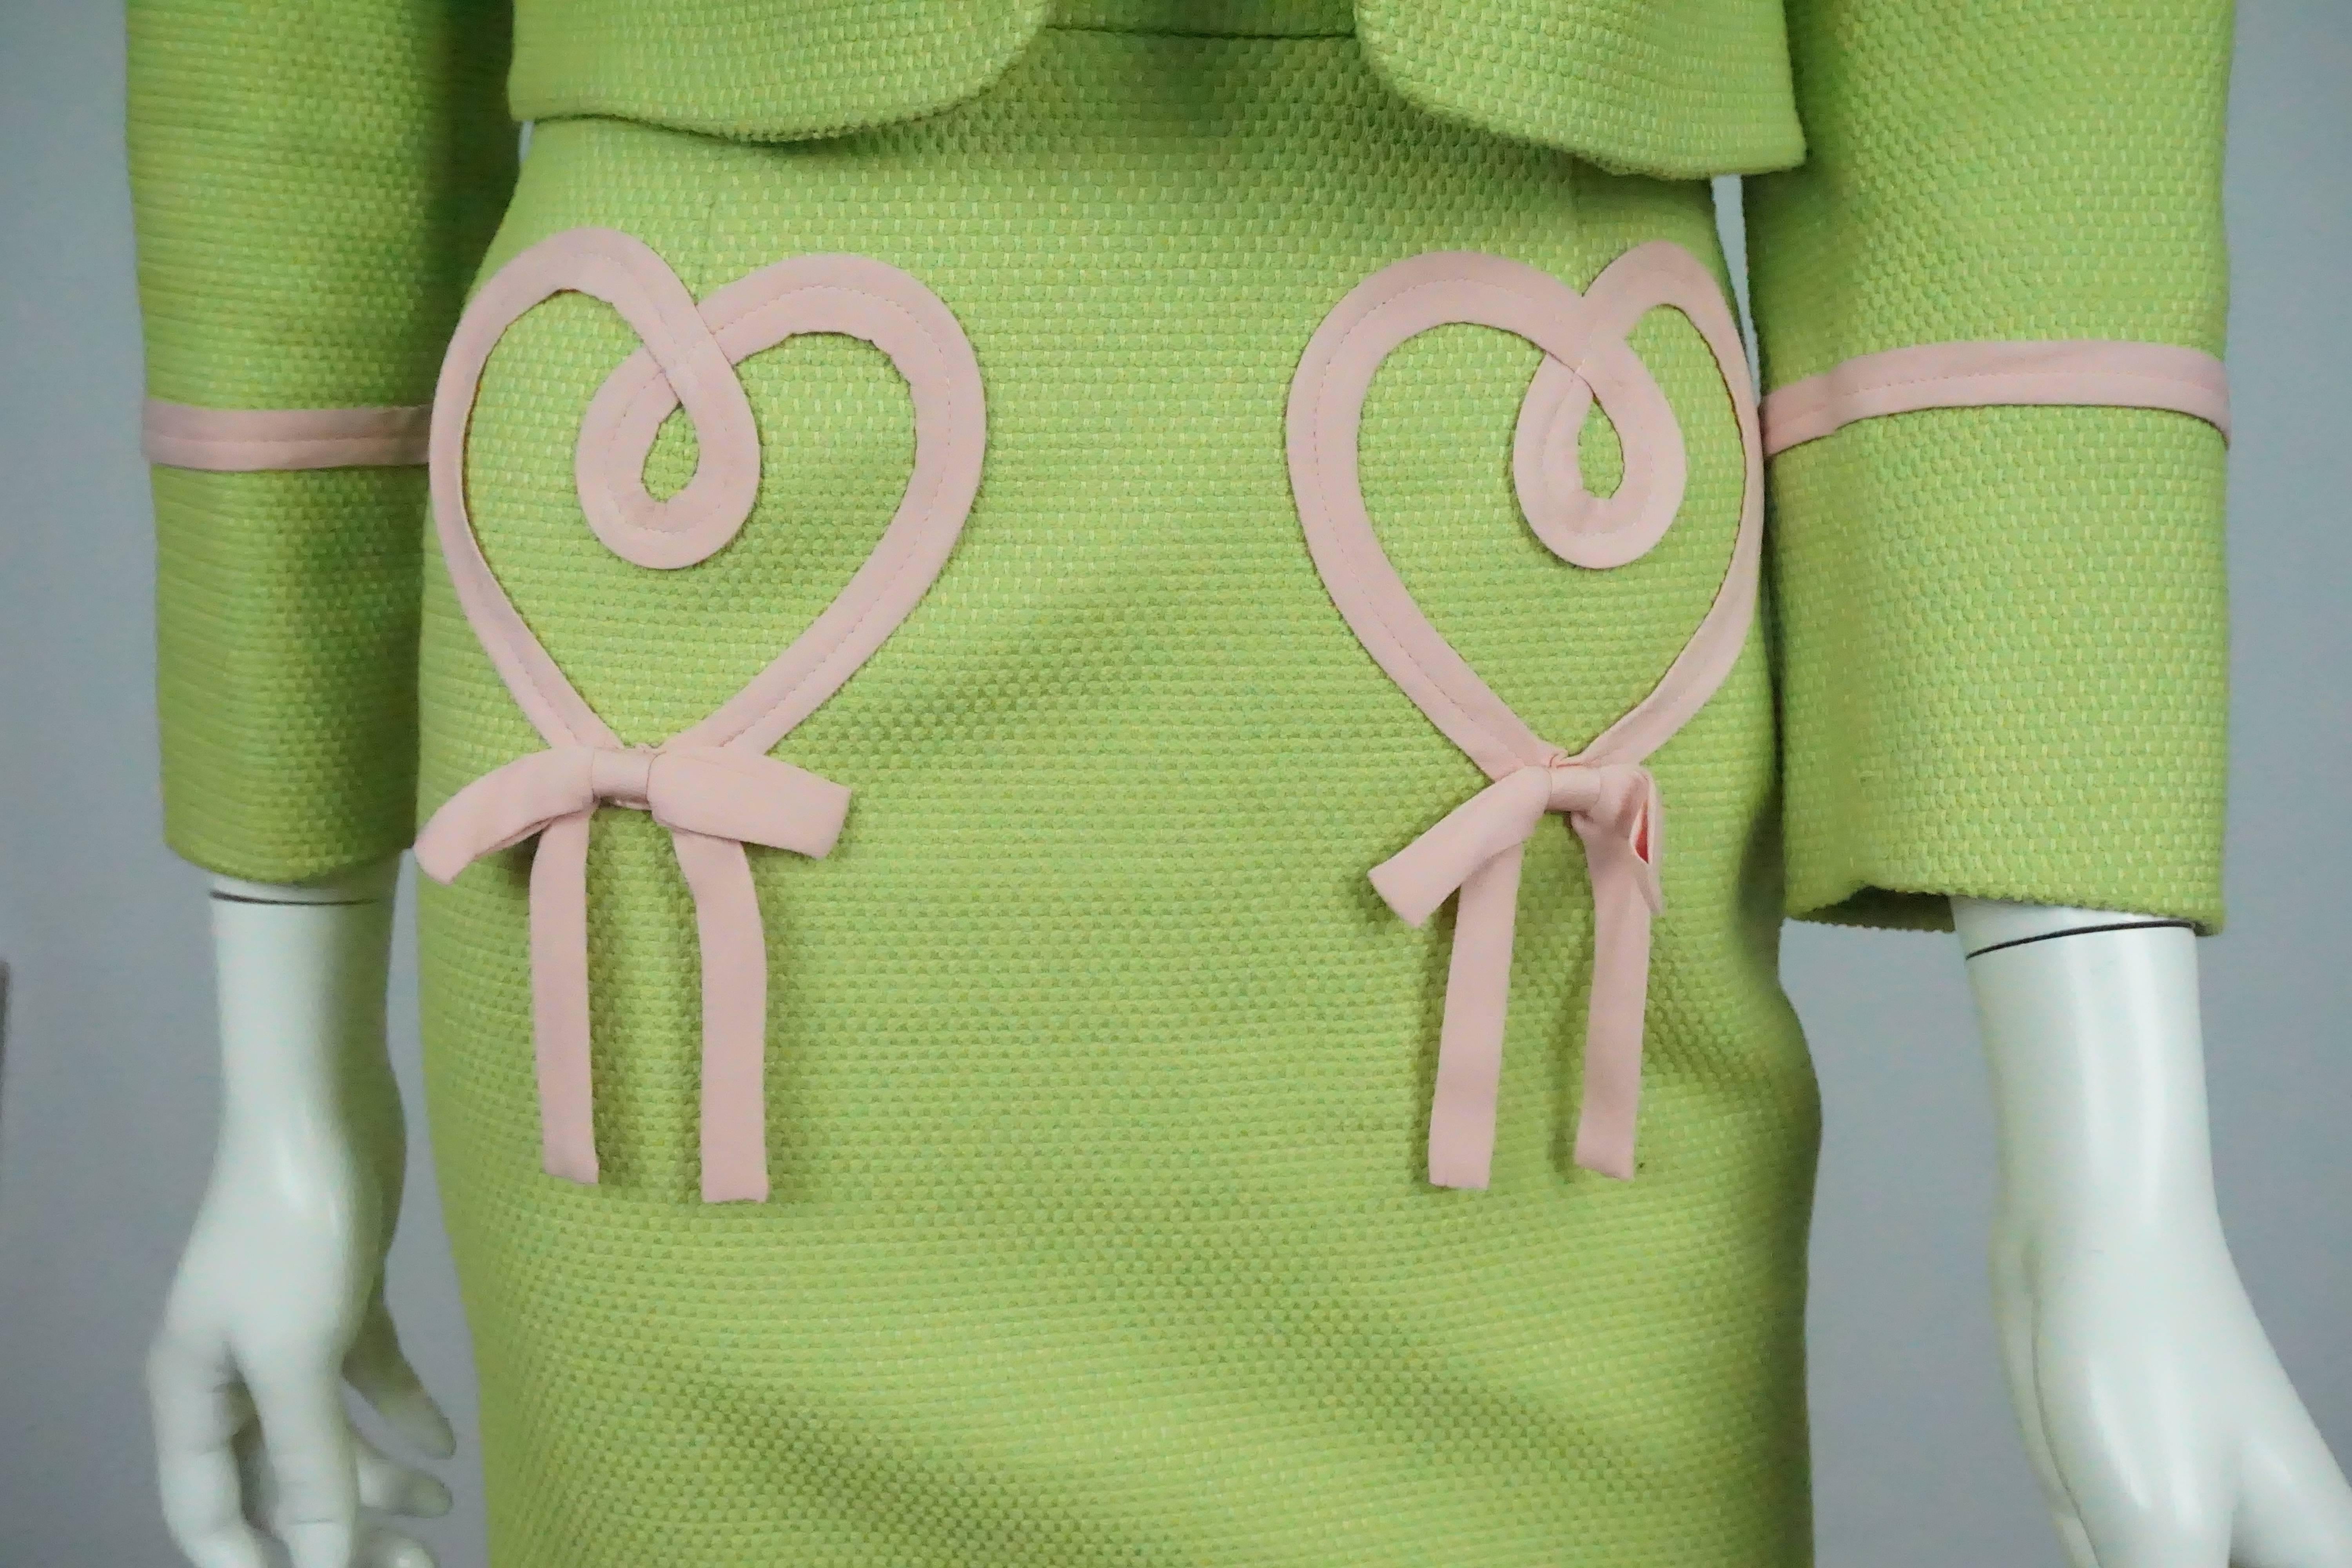 Women's Moschino Cheap and Chic Jacket/Skirt/Top Lime Green Pique w/ Pink Silk Trim - 4